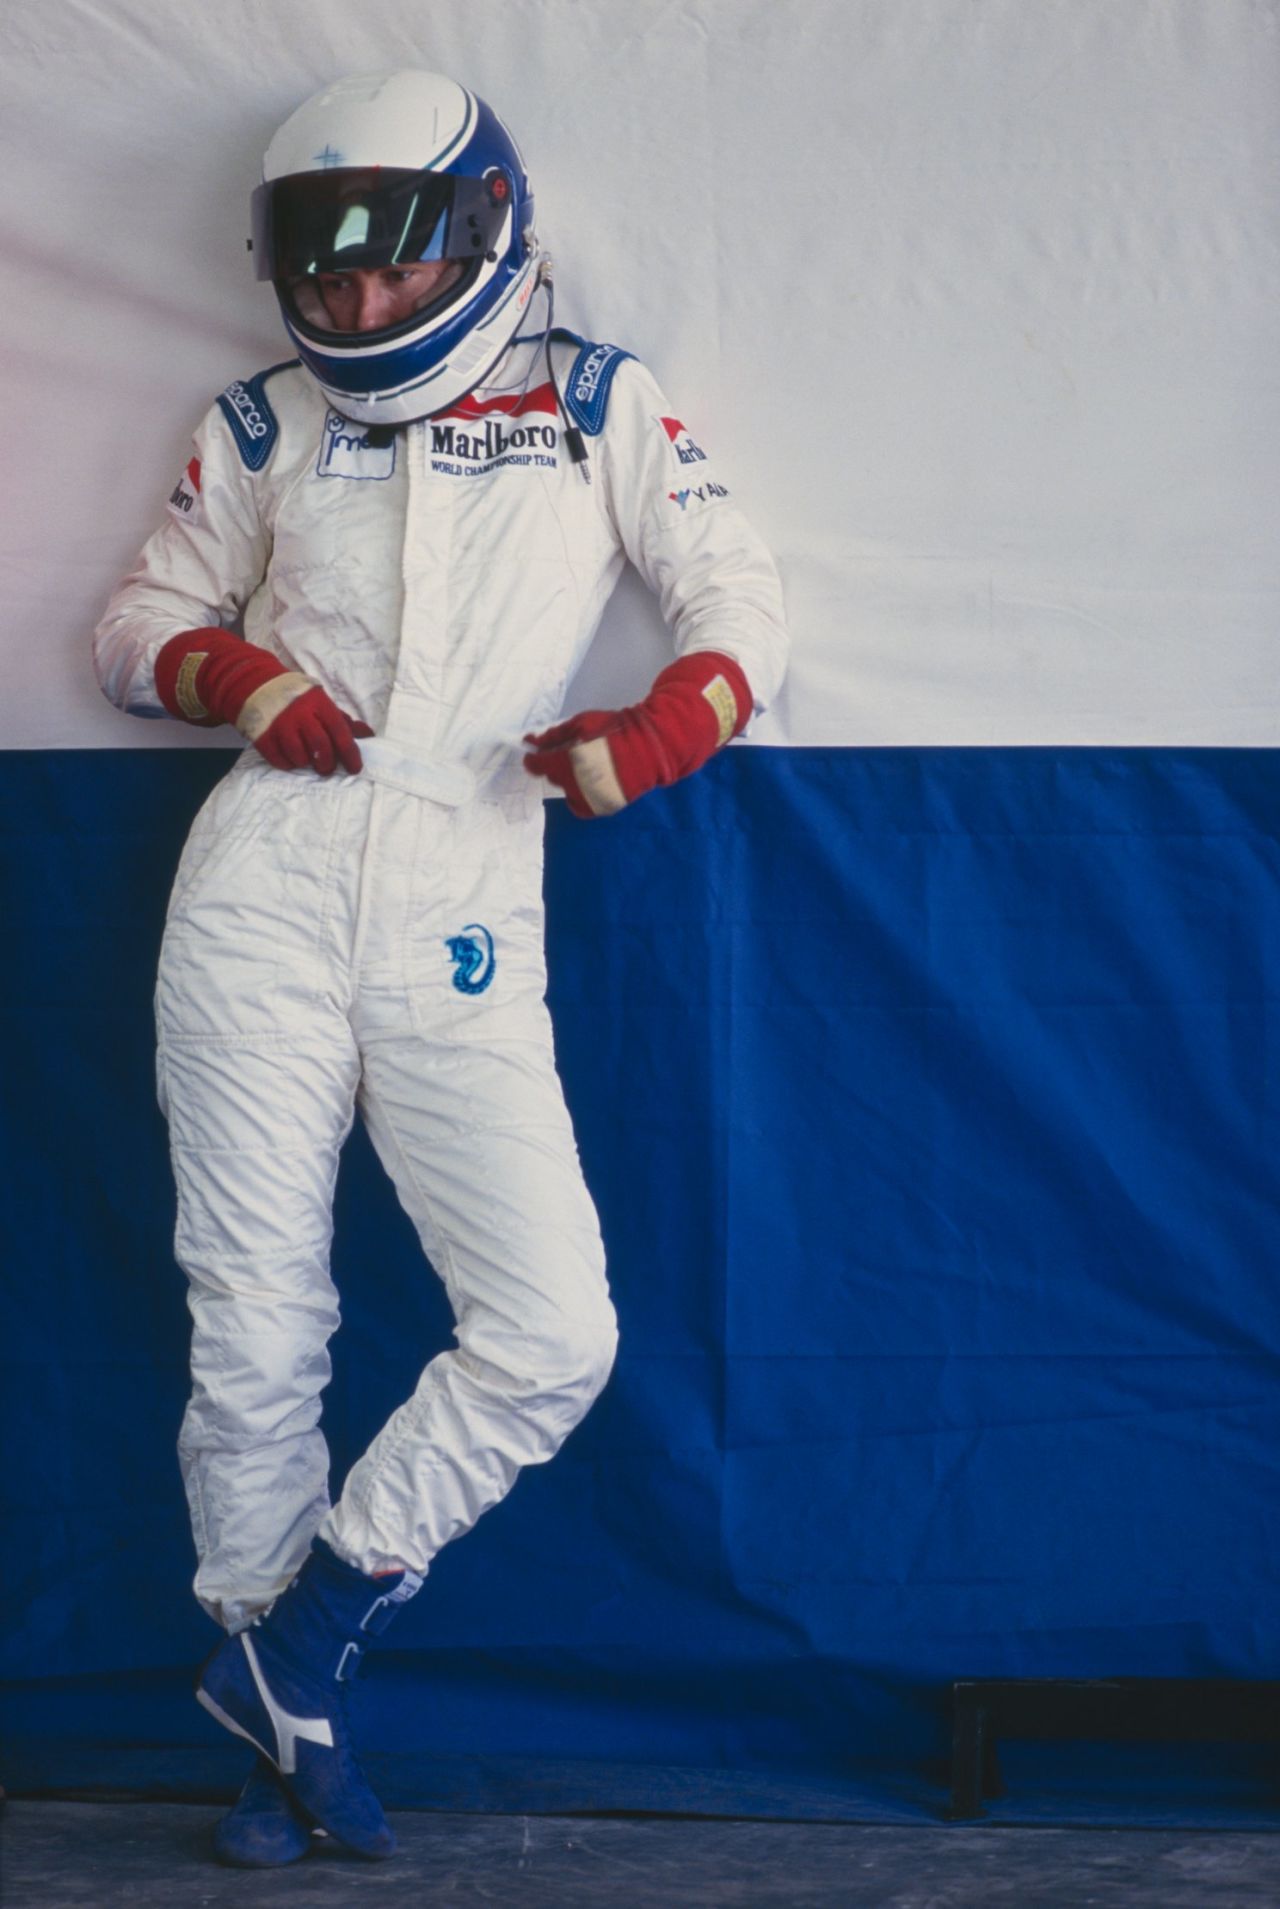 Amati is the most recent female to try to qualify for an F1 race but she failed to set a fast enough time at three grands prix with a largely uncompetitive car.